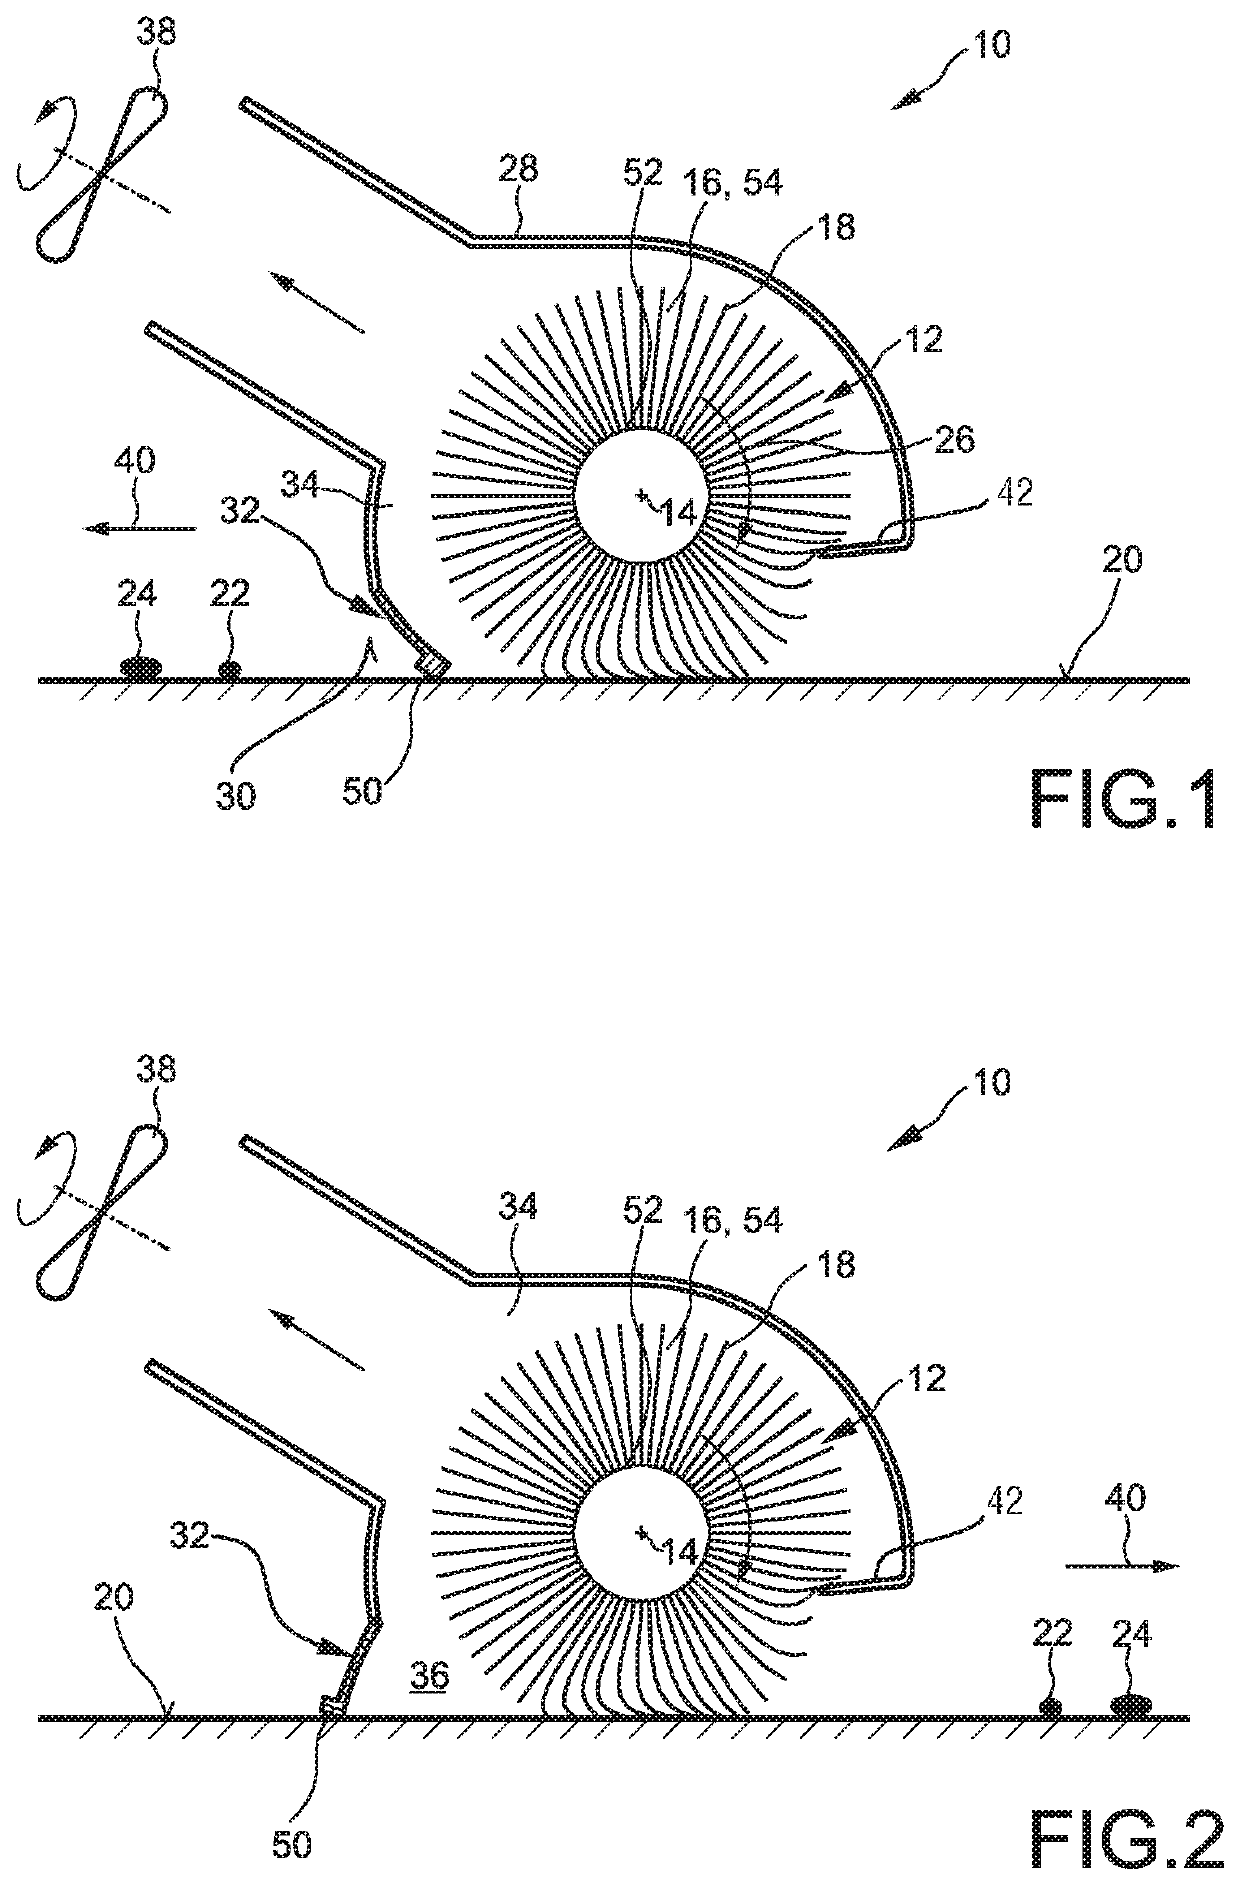 Nozzle arrangement of a cleaning device for cleaning a surface